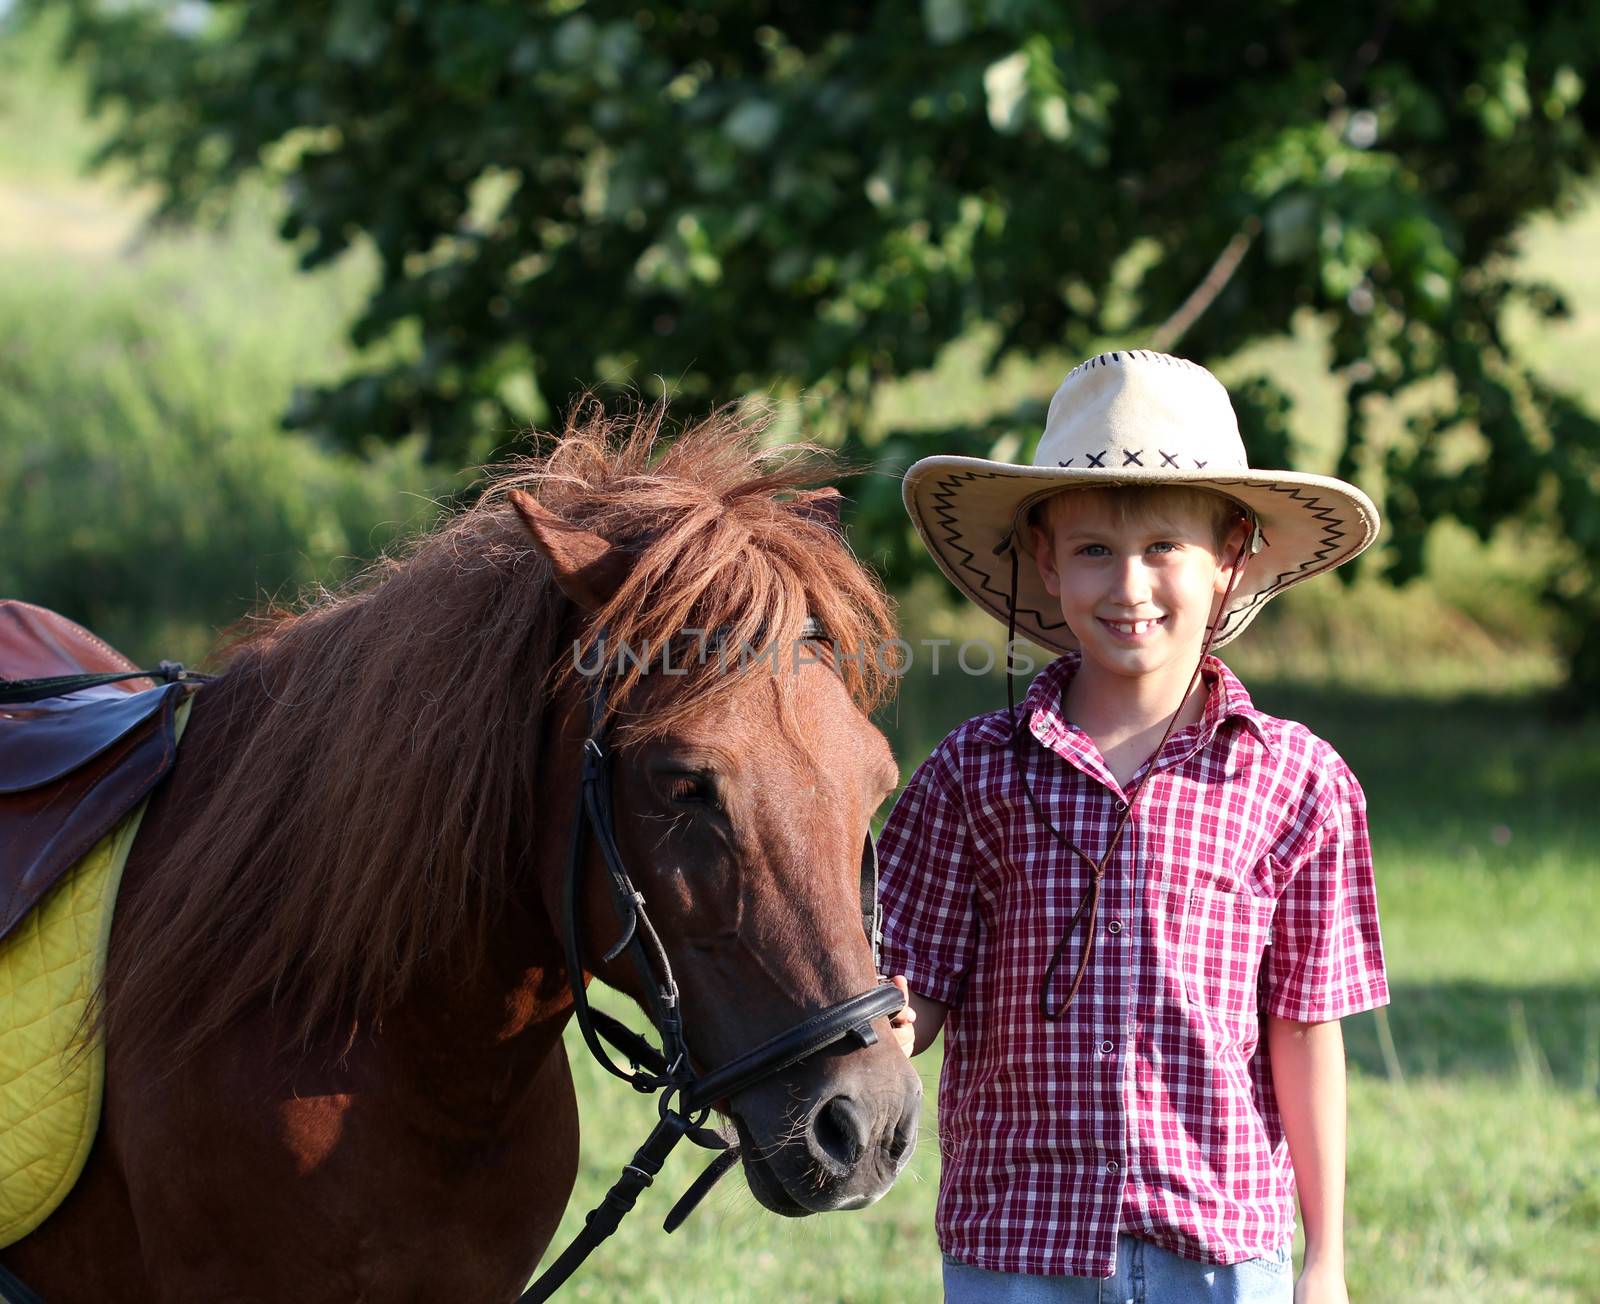 boy with cowboy hat and pony horse  by goce